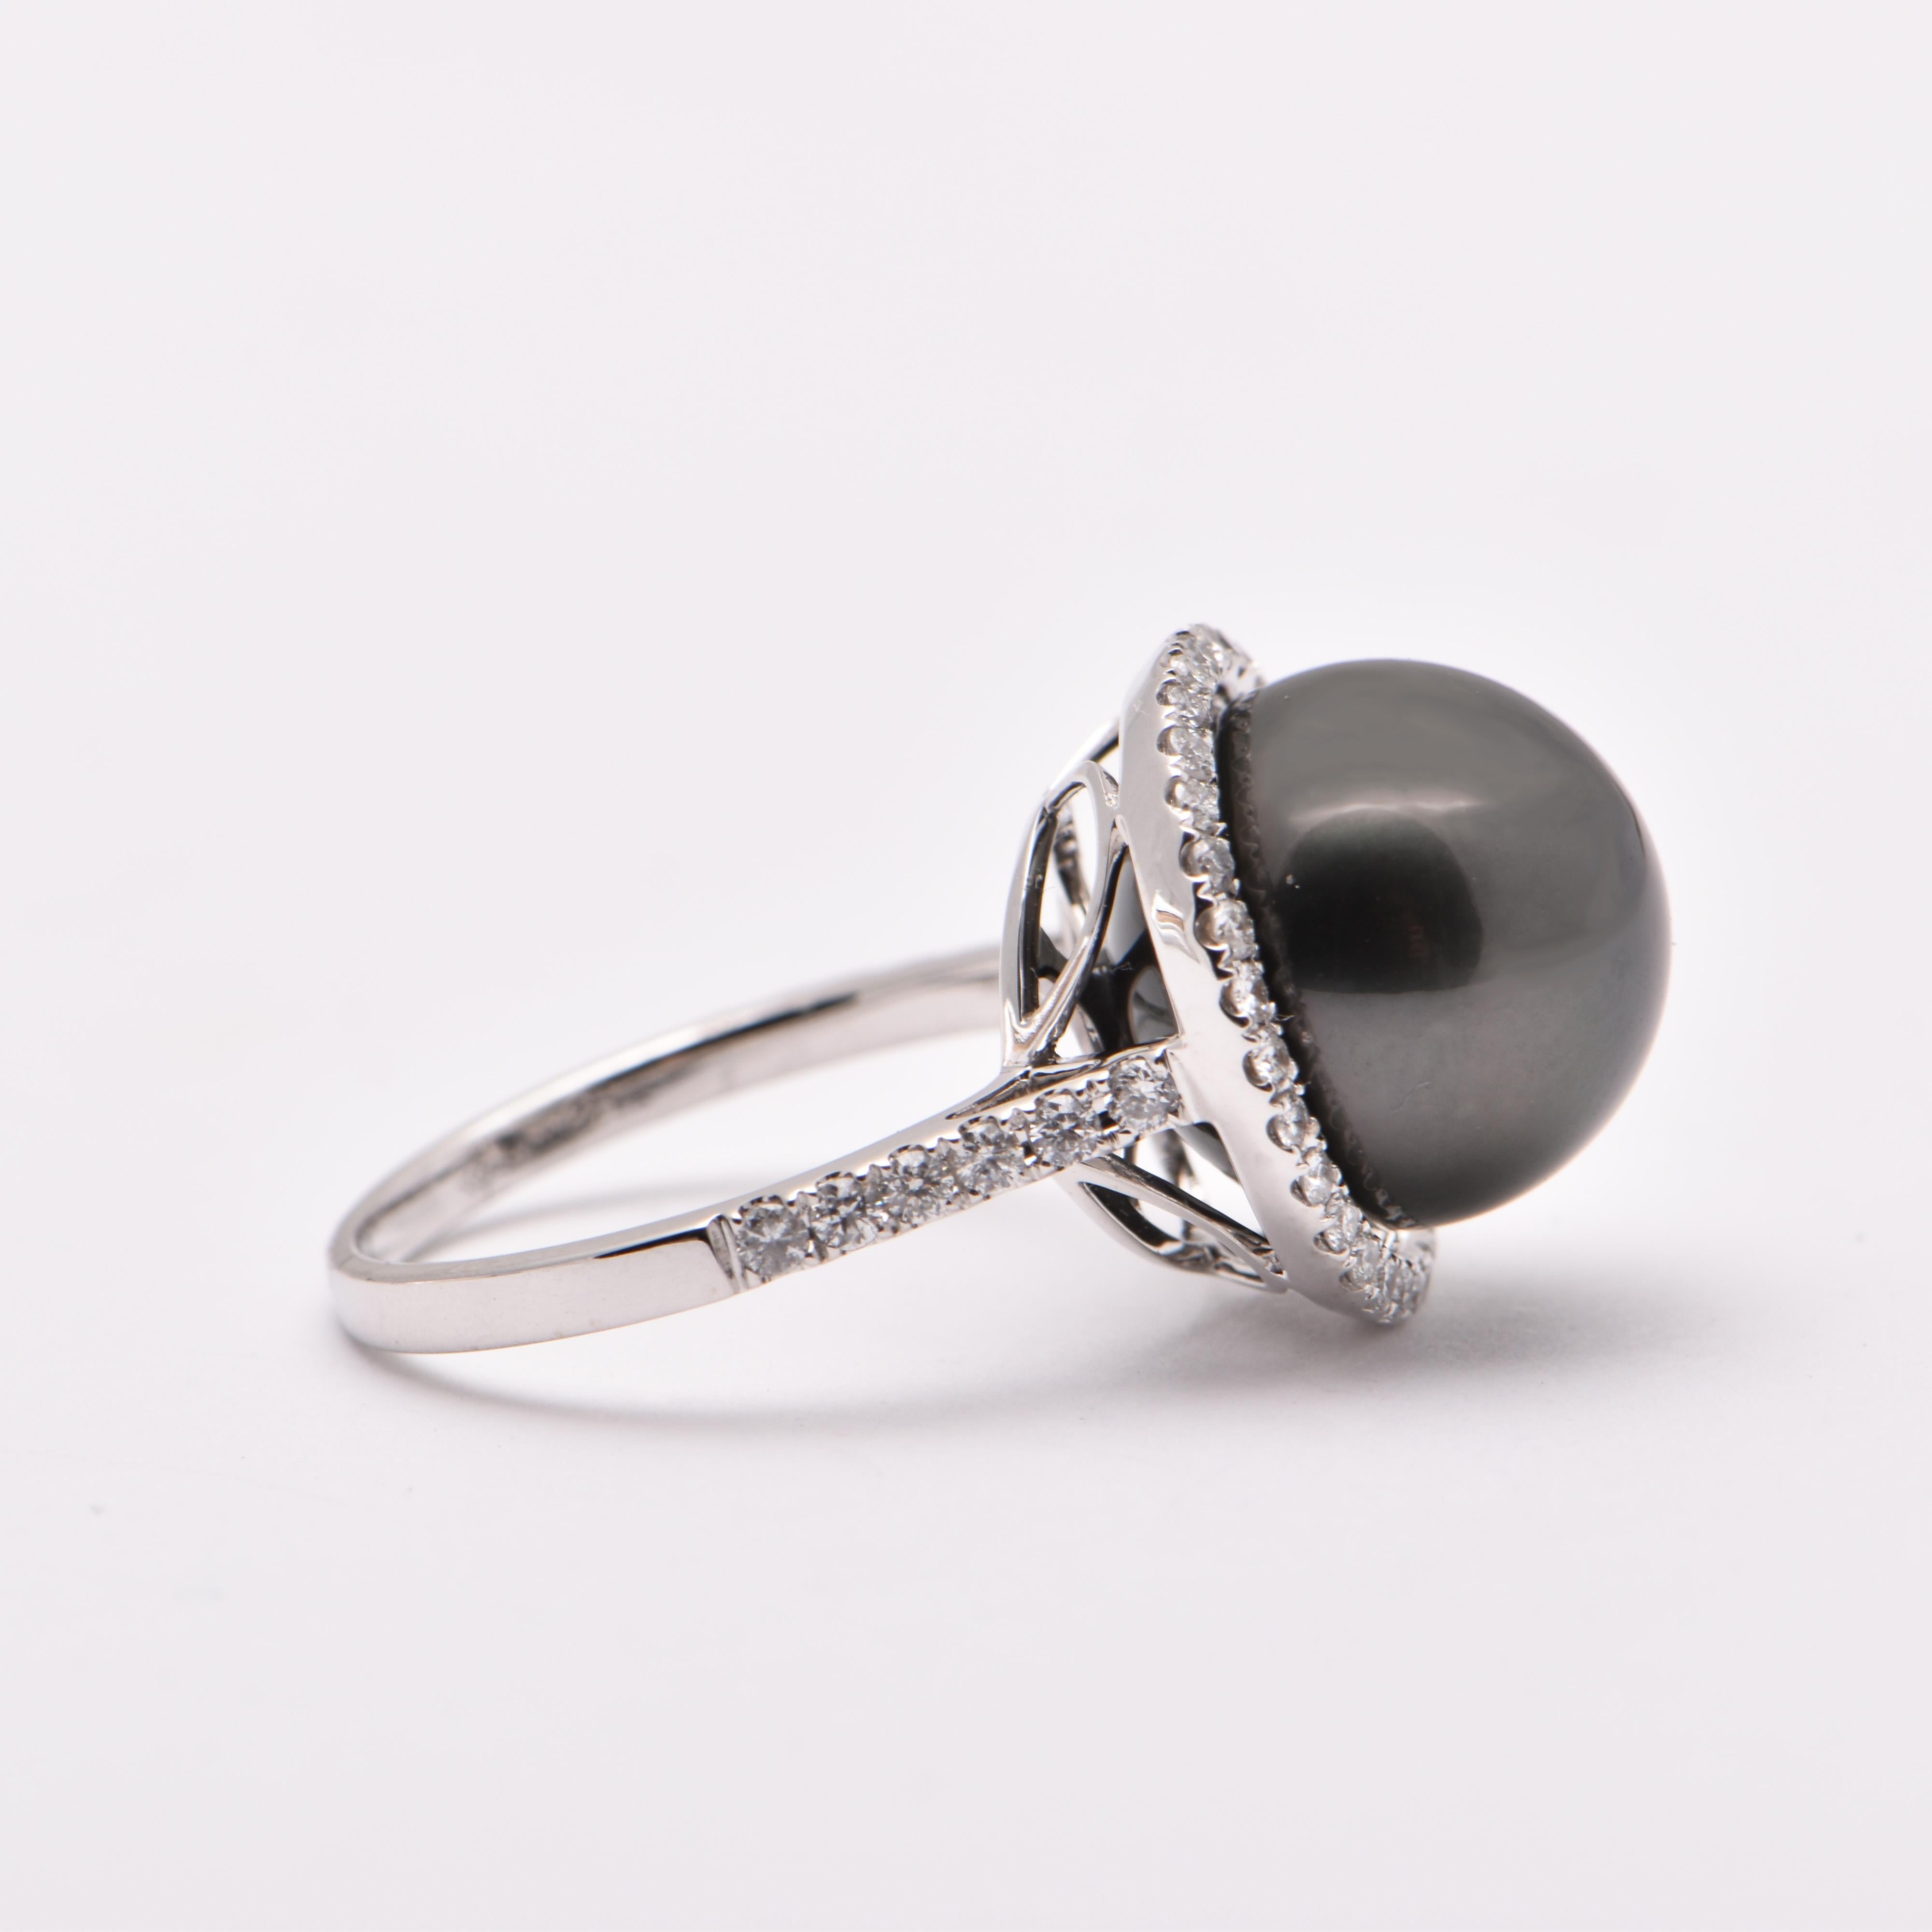 South Sea Black Pearl and Diamond Cocktail Ring in 18k White Gold by Cartmer Jewellery

Size L-M

1 South Sea Pearl
44 Diamonds totalling 0.46 carats
18 Carat White Gold Ring


FREE express postage usually 3-4 days Sydney to New York 
FREE